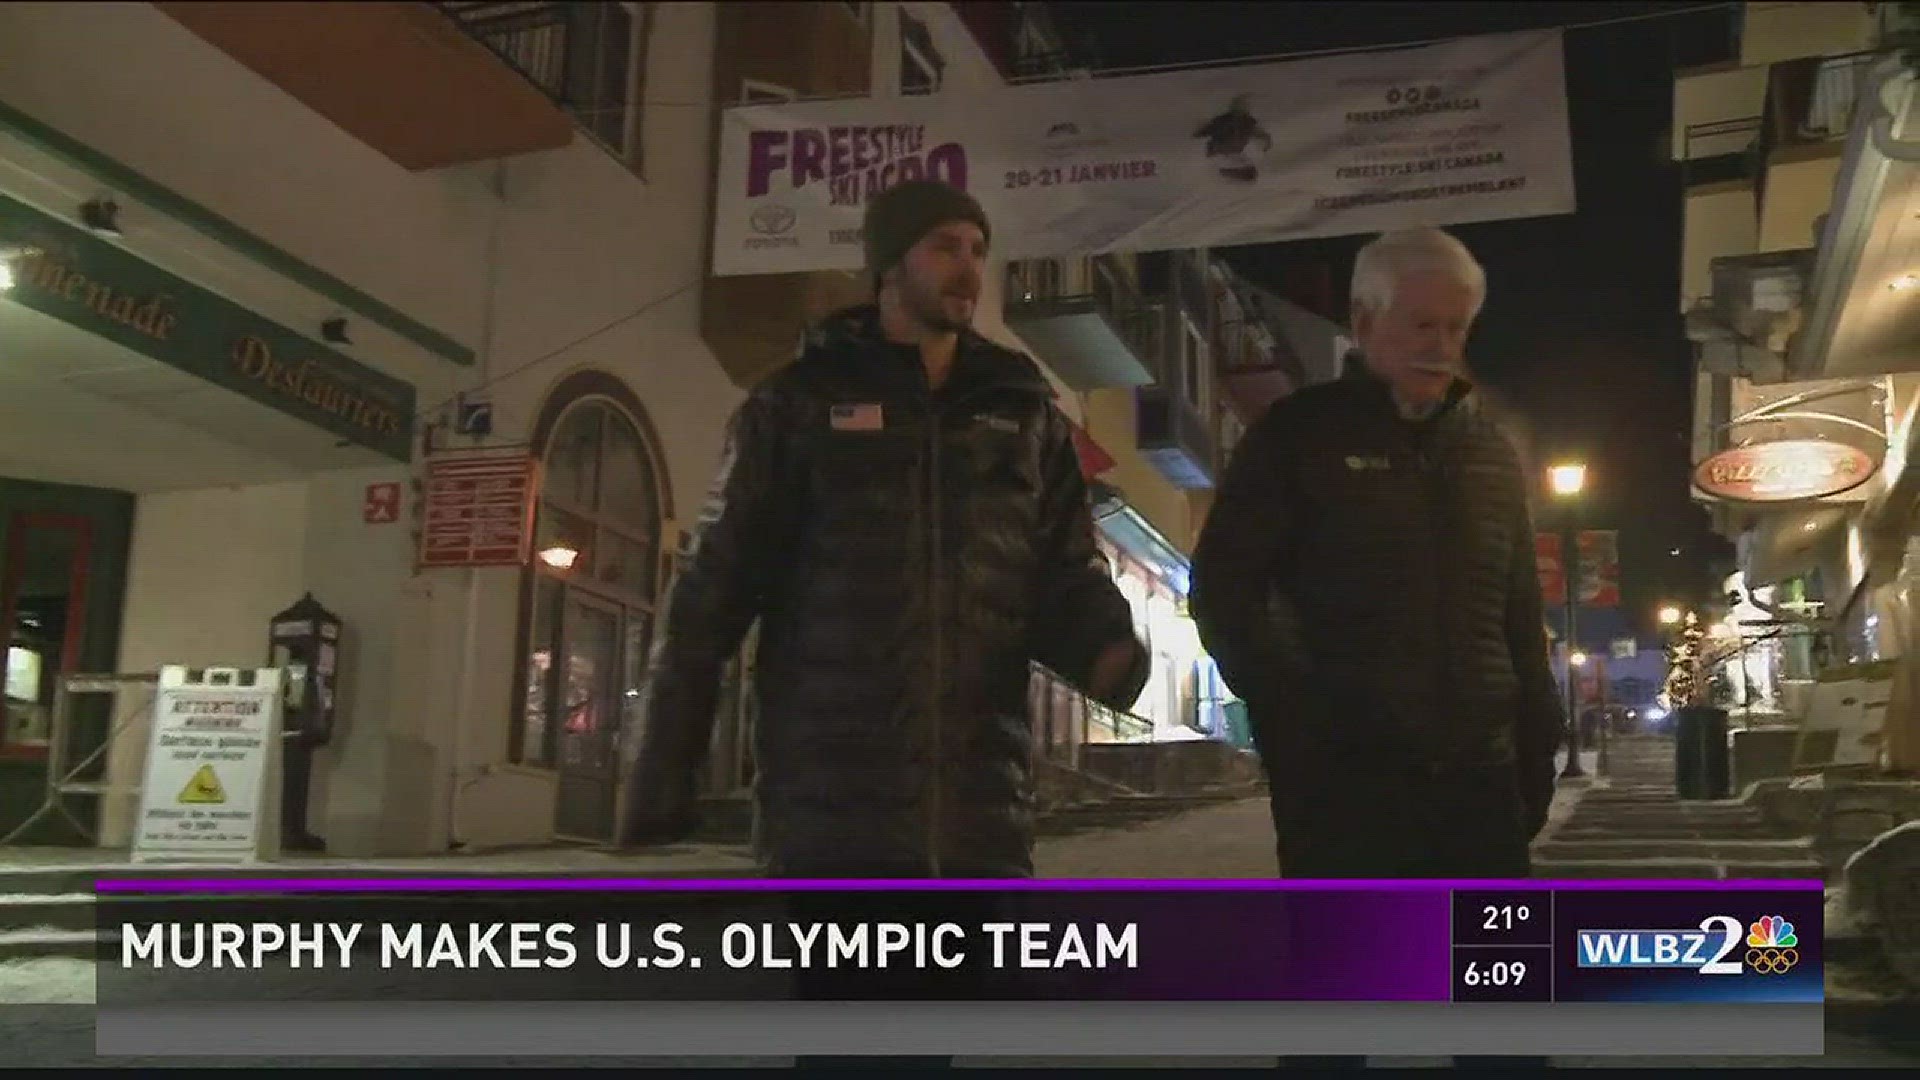 Bethel's Troy Murphy is heading to the Olympics as part of the U.S. Freestyle Ski Team